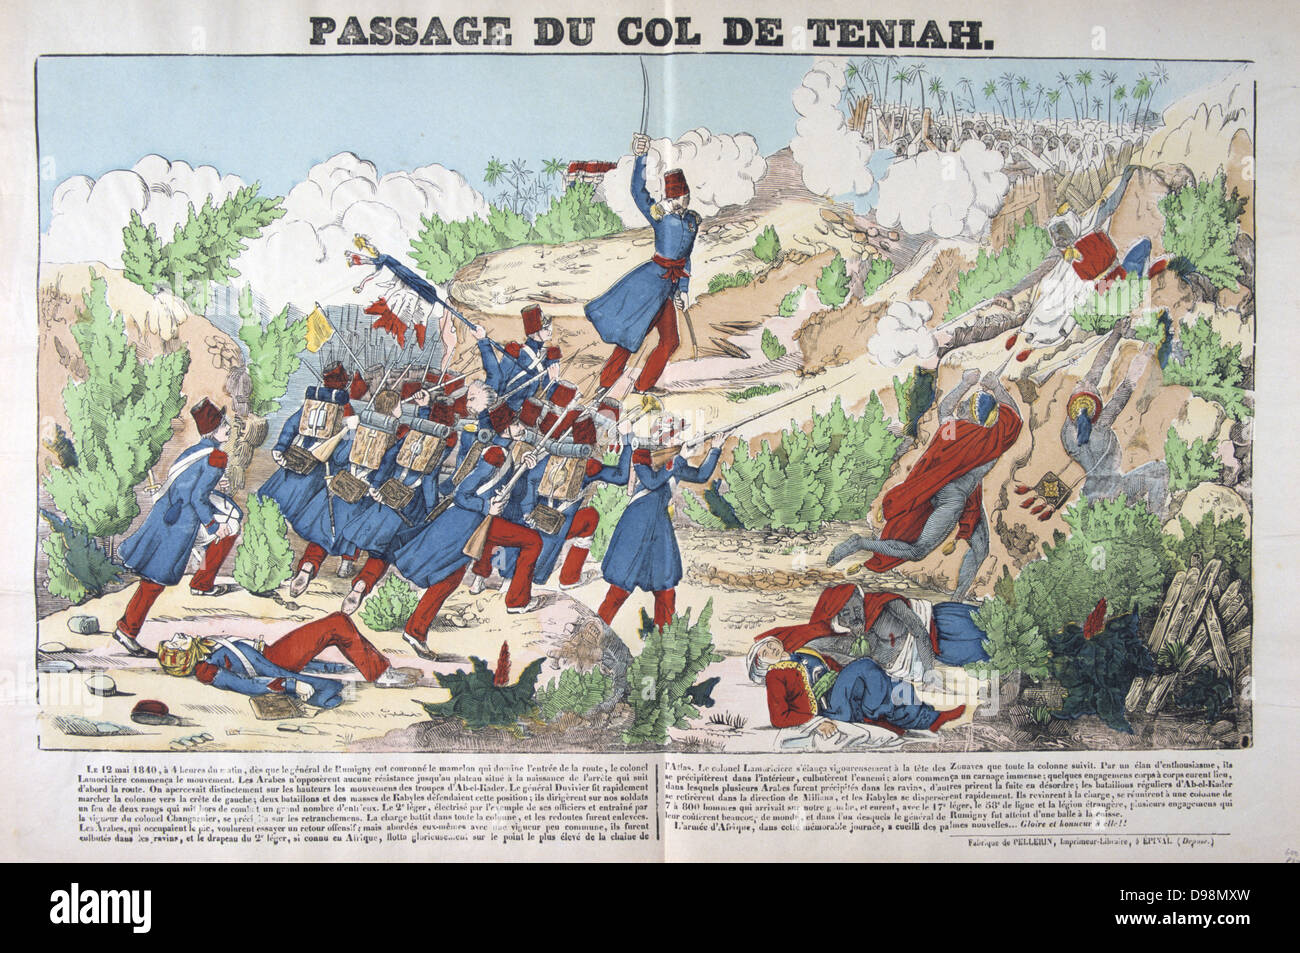 French conquest of Algeria. French troops fighting their way through the Teniah Pass, 12 May 1840. France Military Infantry Smallarms Rifle North Africa Colonialism. Stock Photo